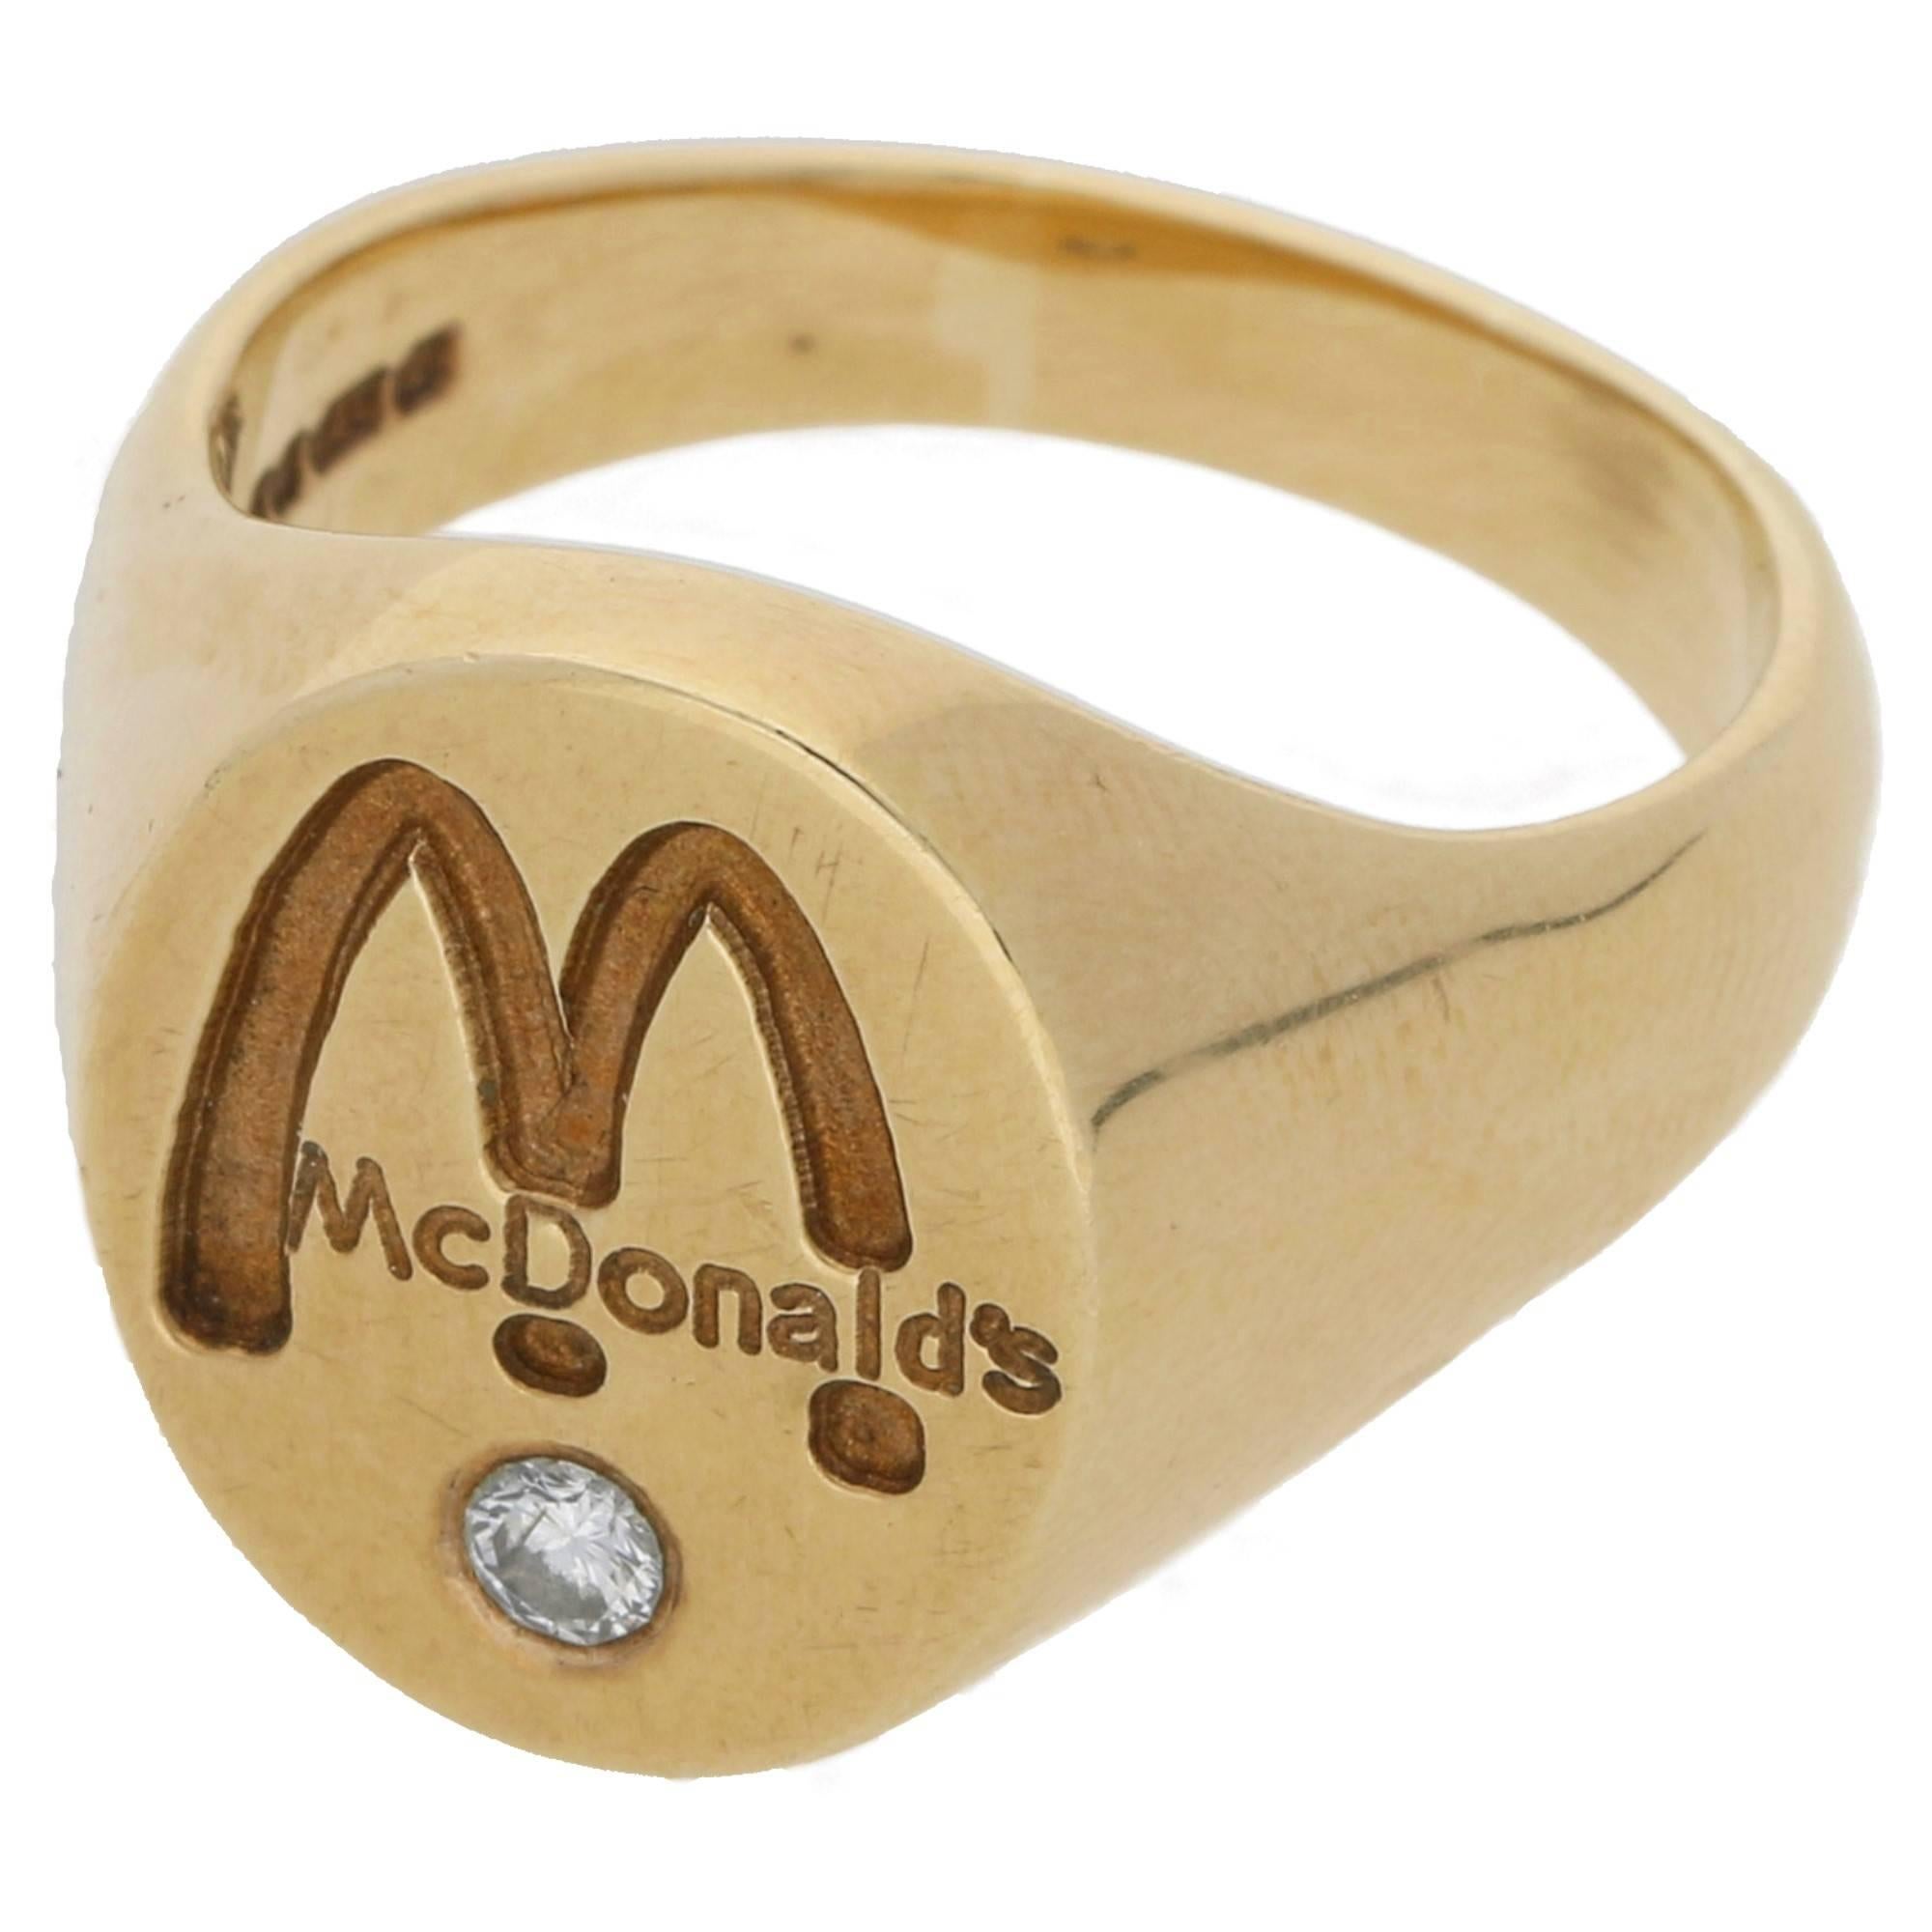 A collectible 9ct McDonald's logo signet ring, originally given as a gift to long standing employees. A fun and wearable vintage piece! Set with a round brilliant diamond. This ring can be sized upon request. With full hallmarks: London, 1993, 375